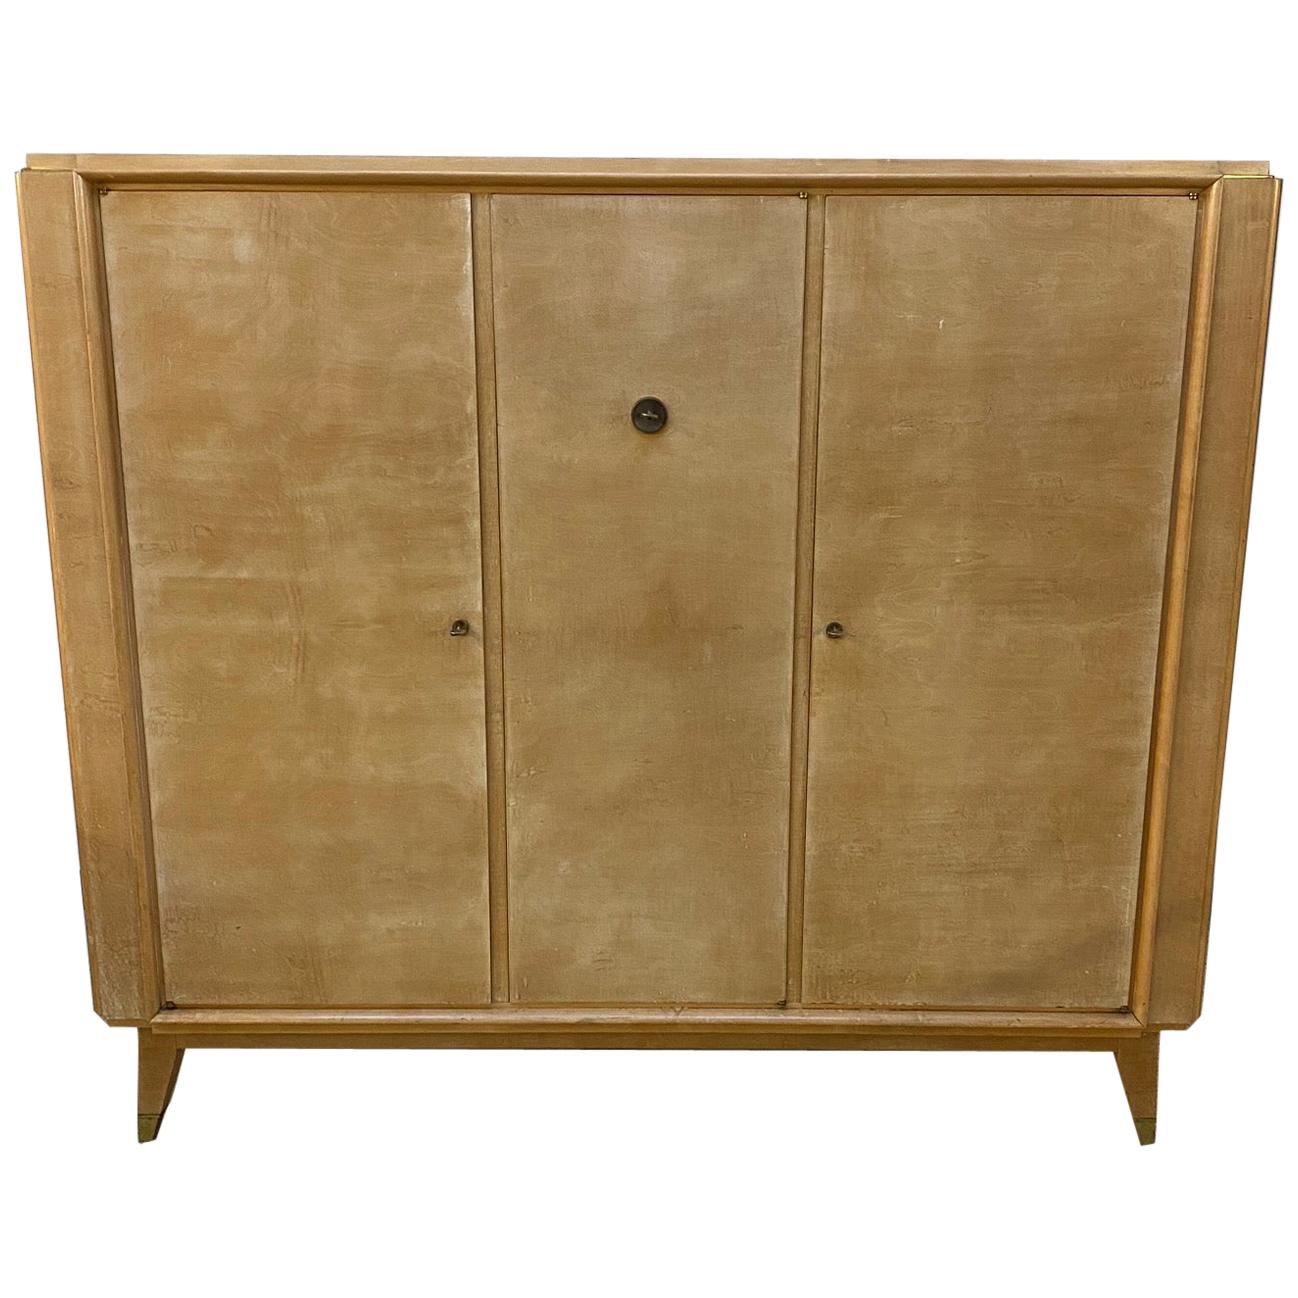 André Beaudoin, Art Deco Cabinet in Sycamore and Bronze, circa 1940-1950